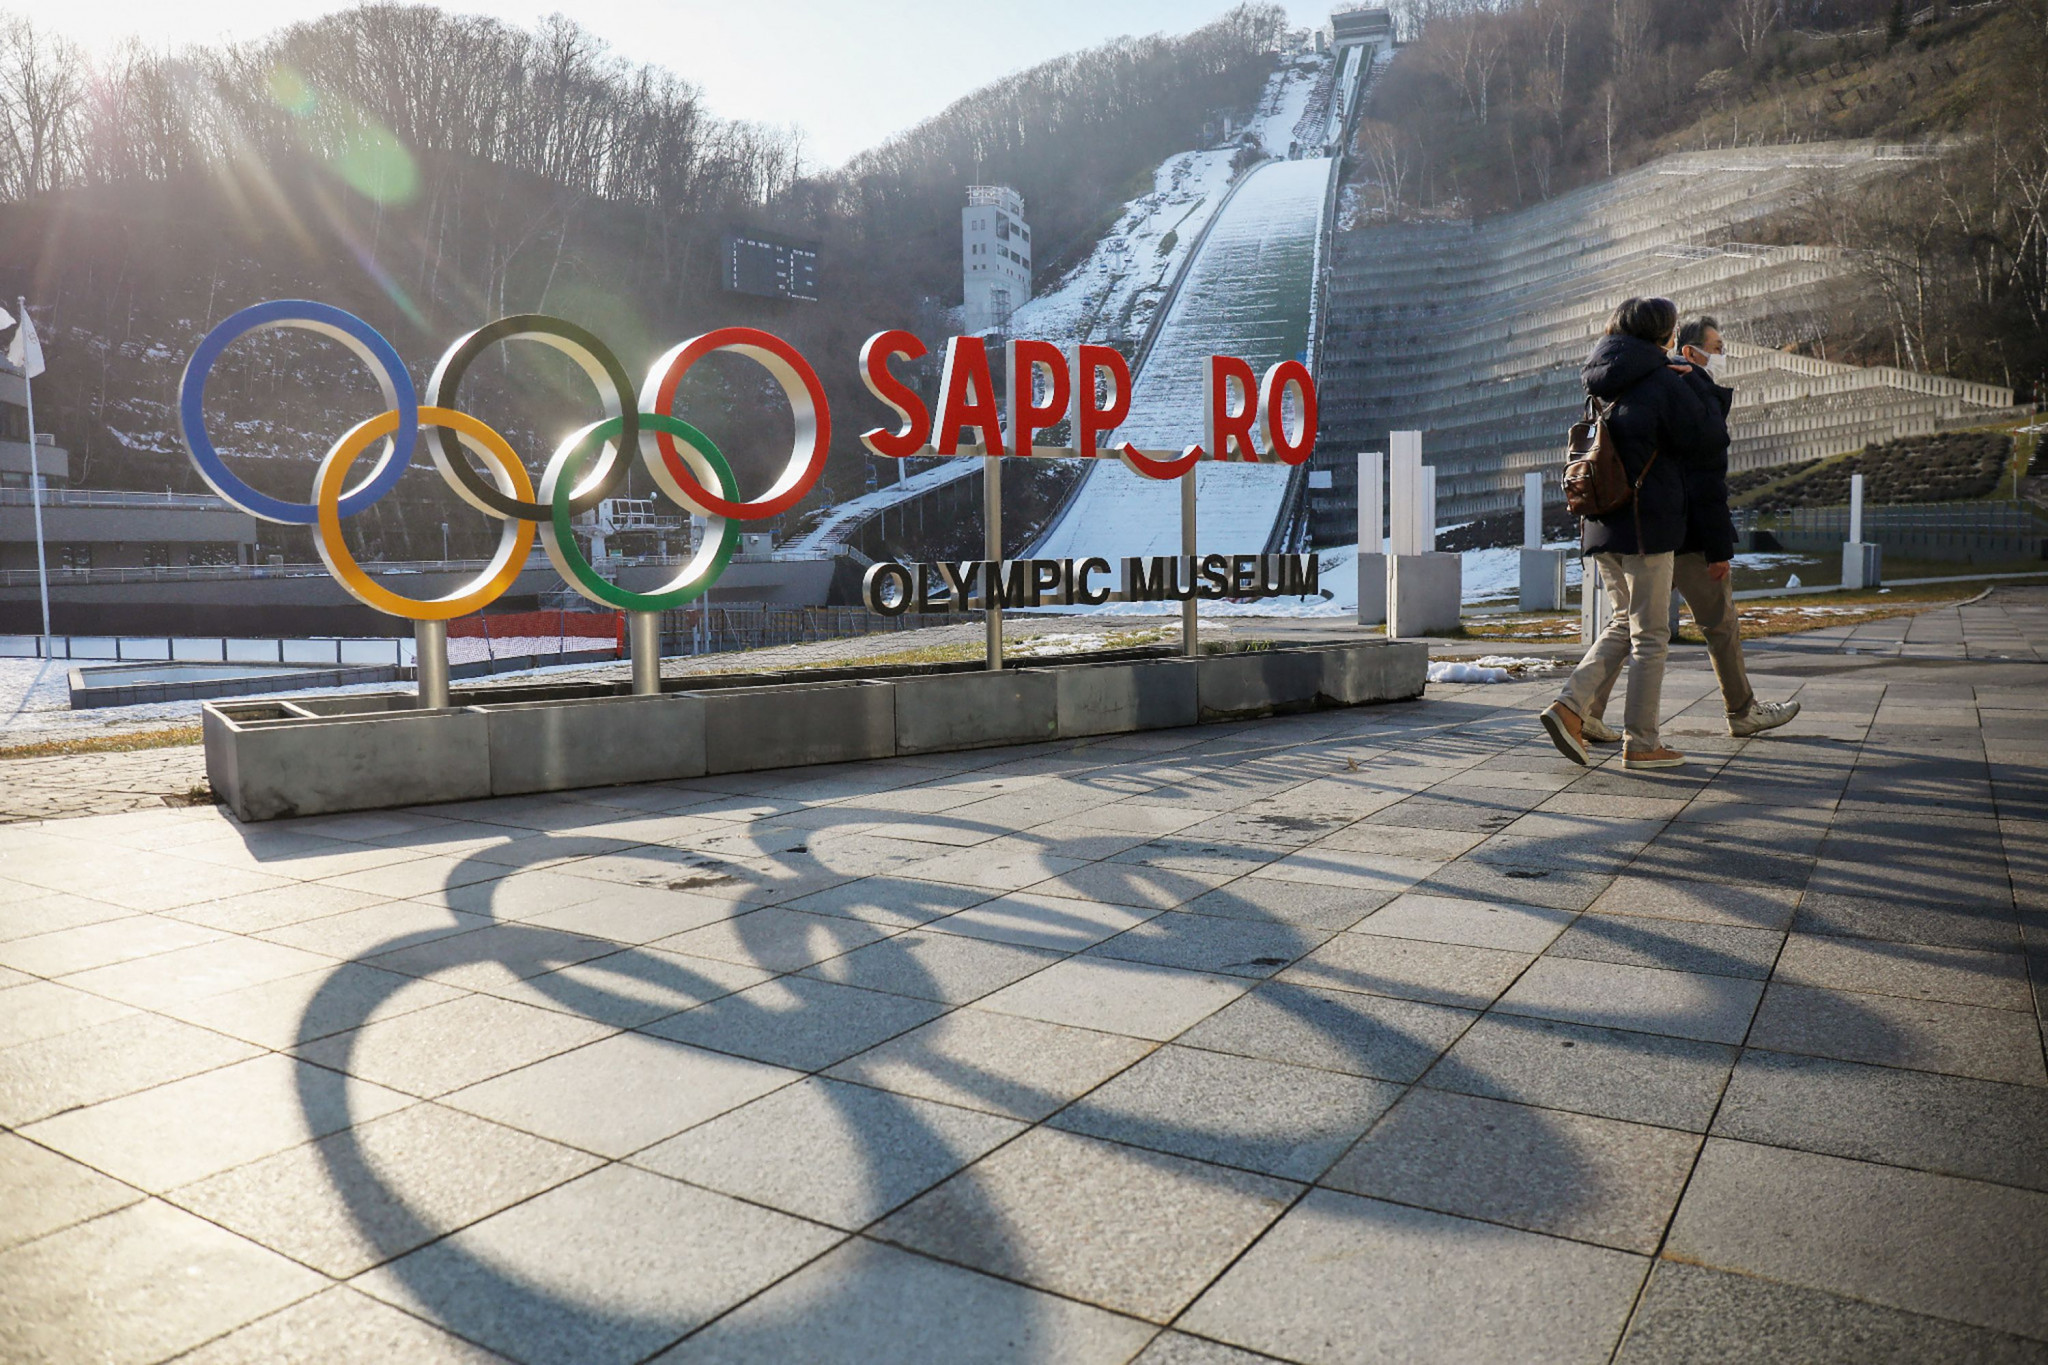 Sapporo's representatives have inspected its facilities in the run-up to the 2030 bid ©Getty Images